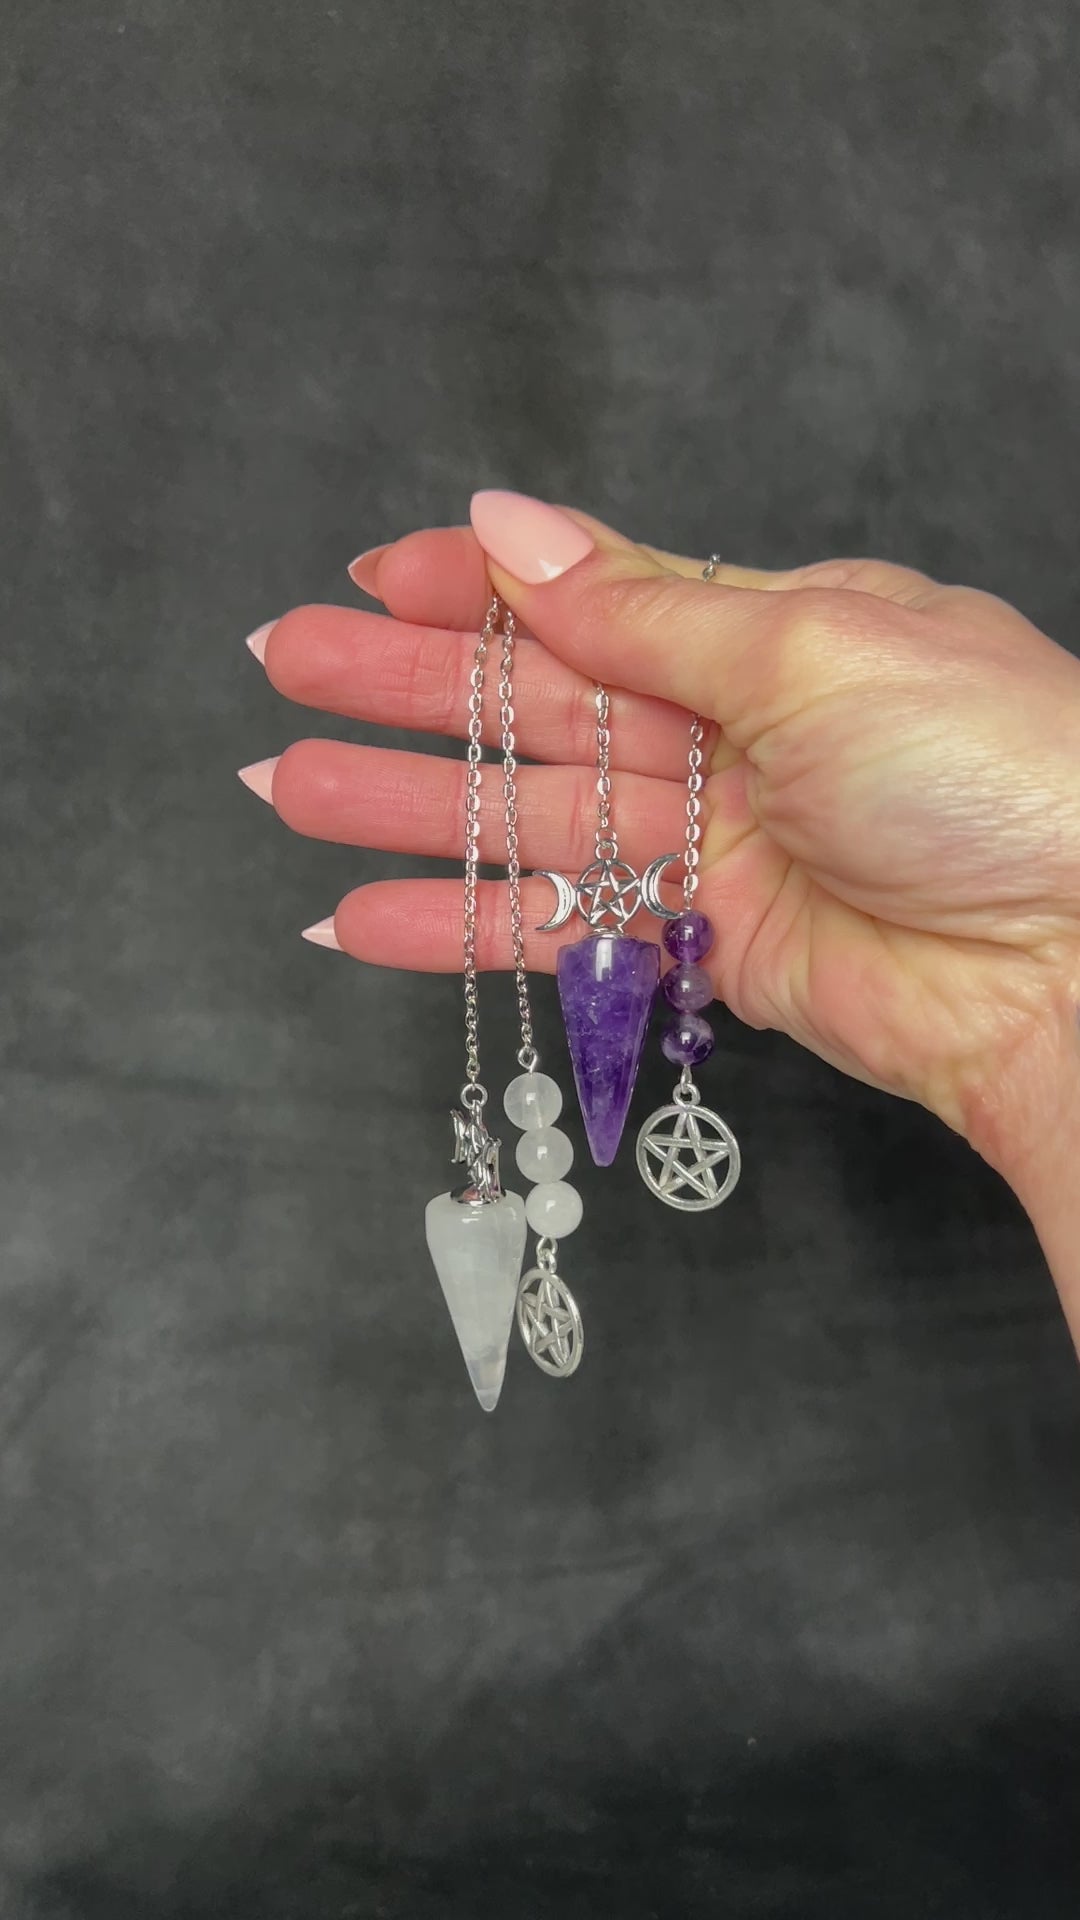 gemstone divination dowsing pendulum triple moon pentacle wiccan pagan witch wizard tool amethyst clear quartz